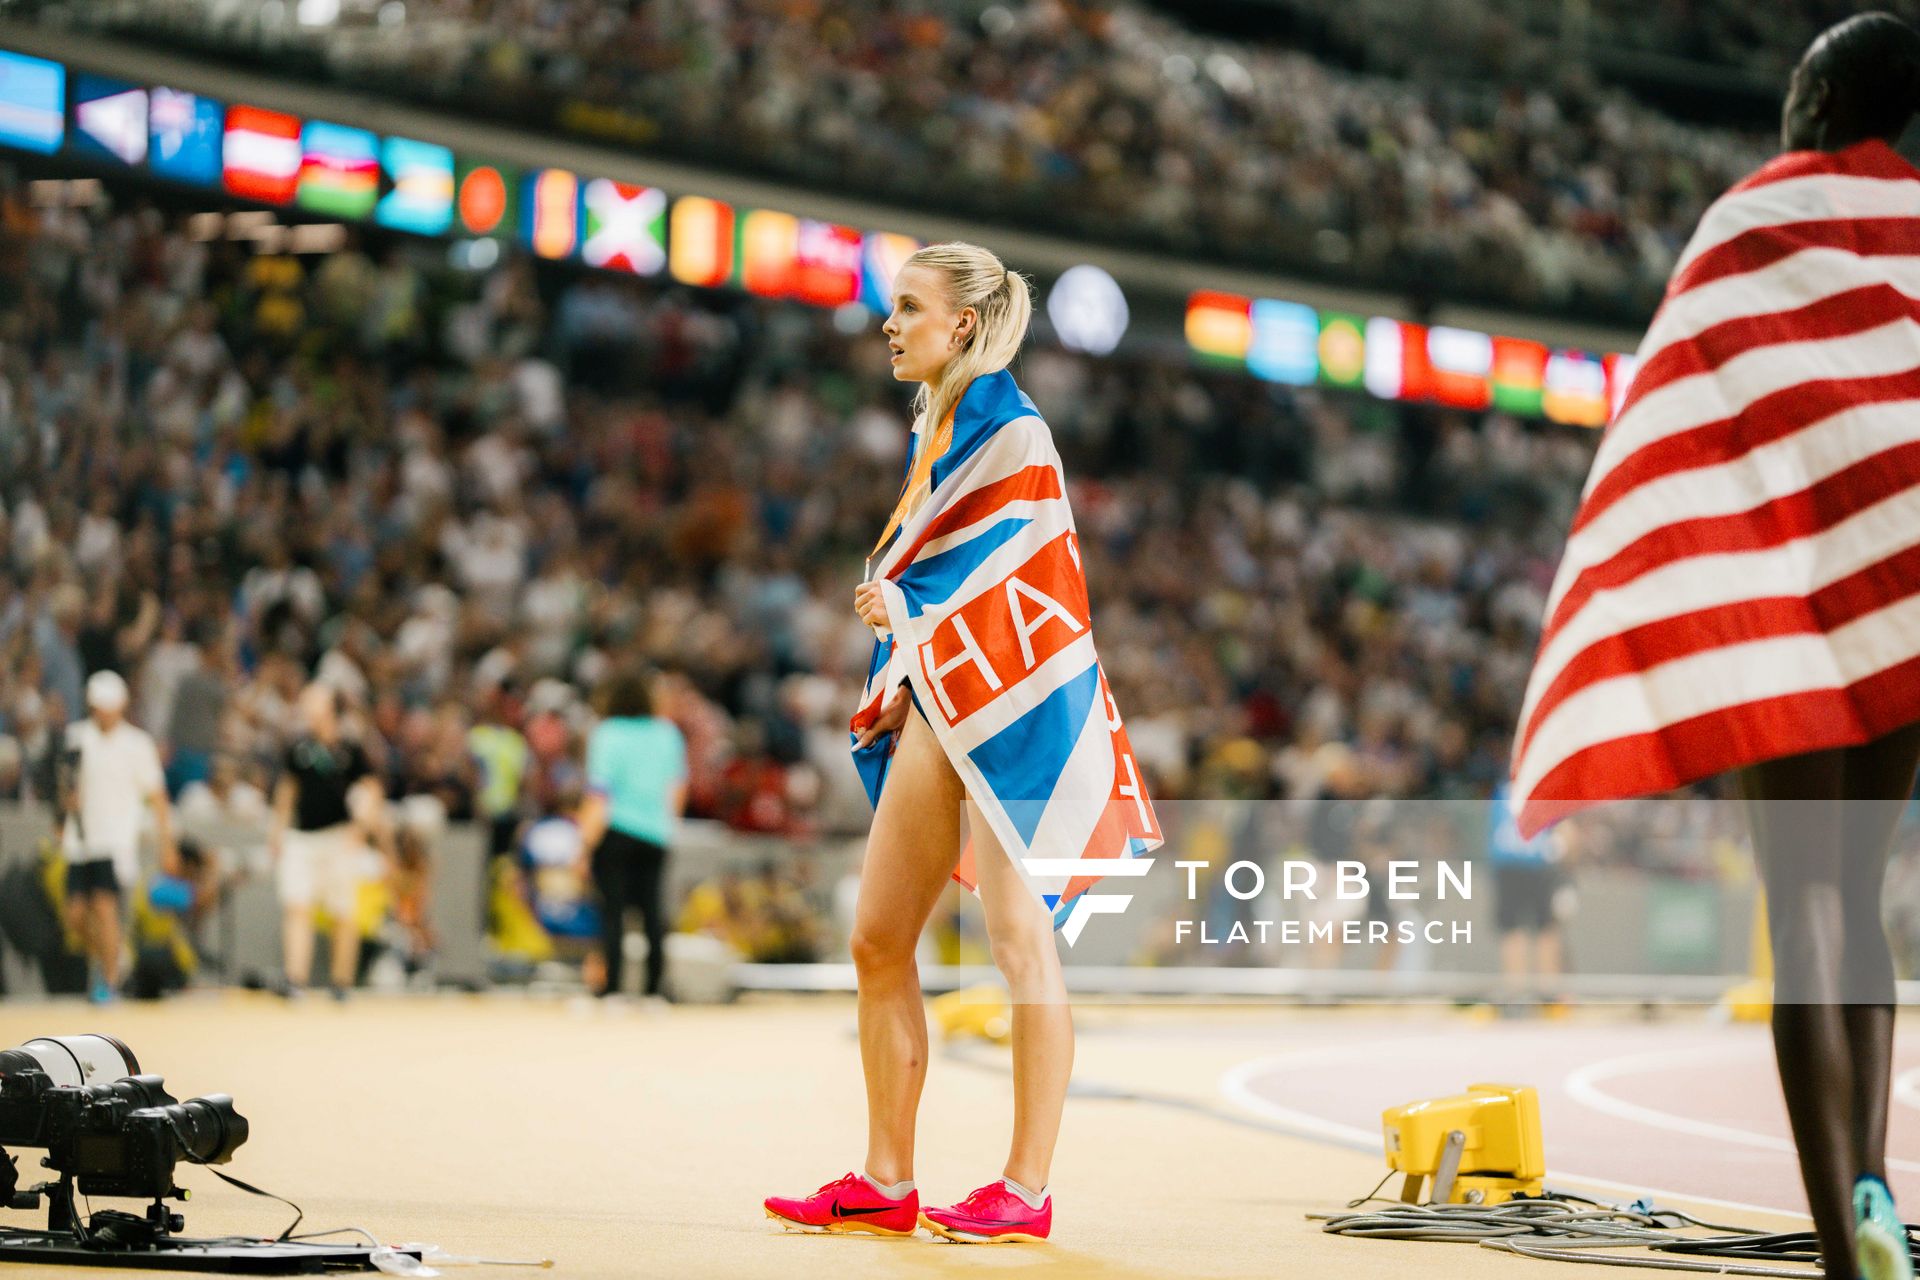 Keely Hodgkinson (GBR/Great Britain & N.I.) during the 800 Metres on Day 9 of the World Athletics Championships Budapest 23 at the National Athletics Centre in Budapest, Hungary on August 27, 2023.